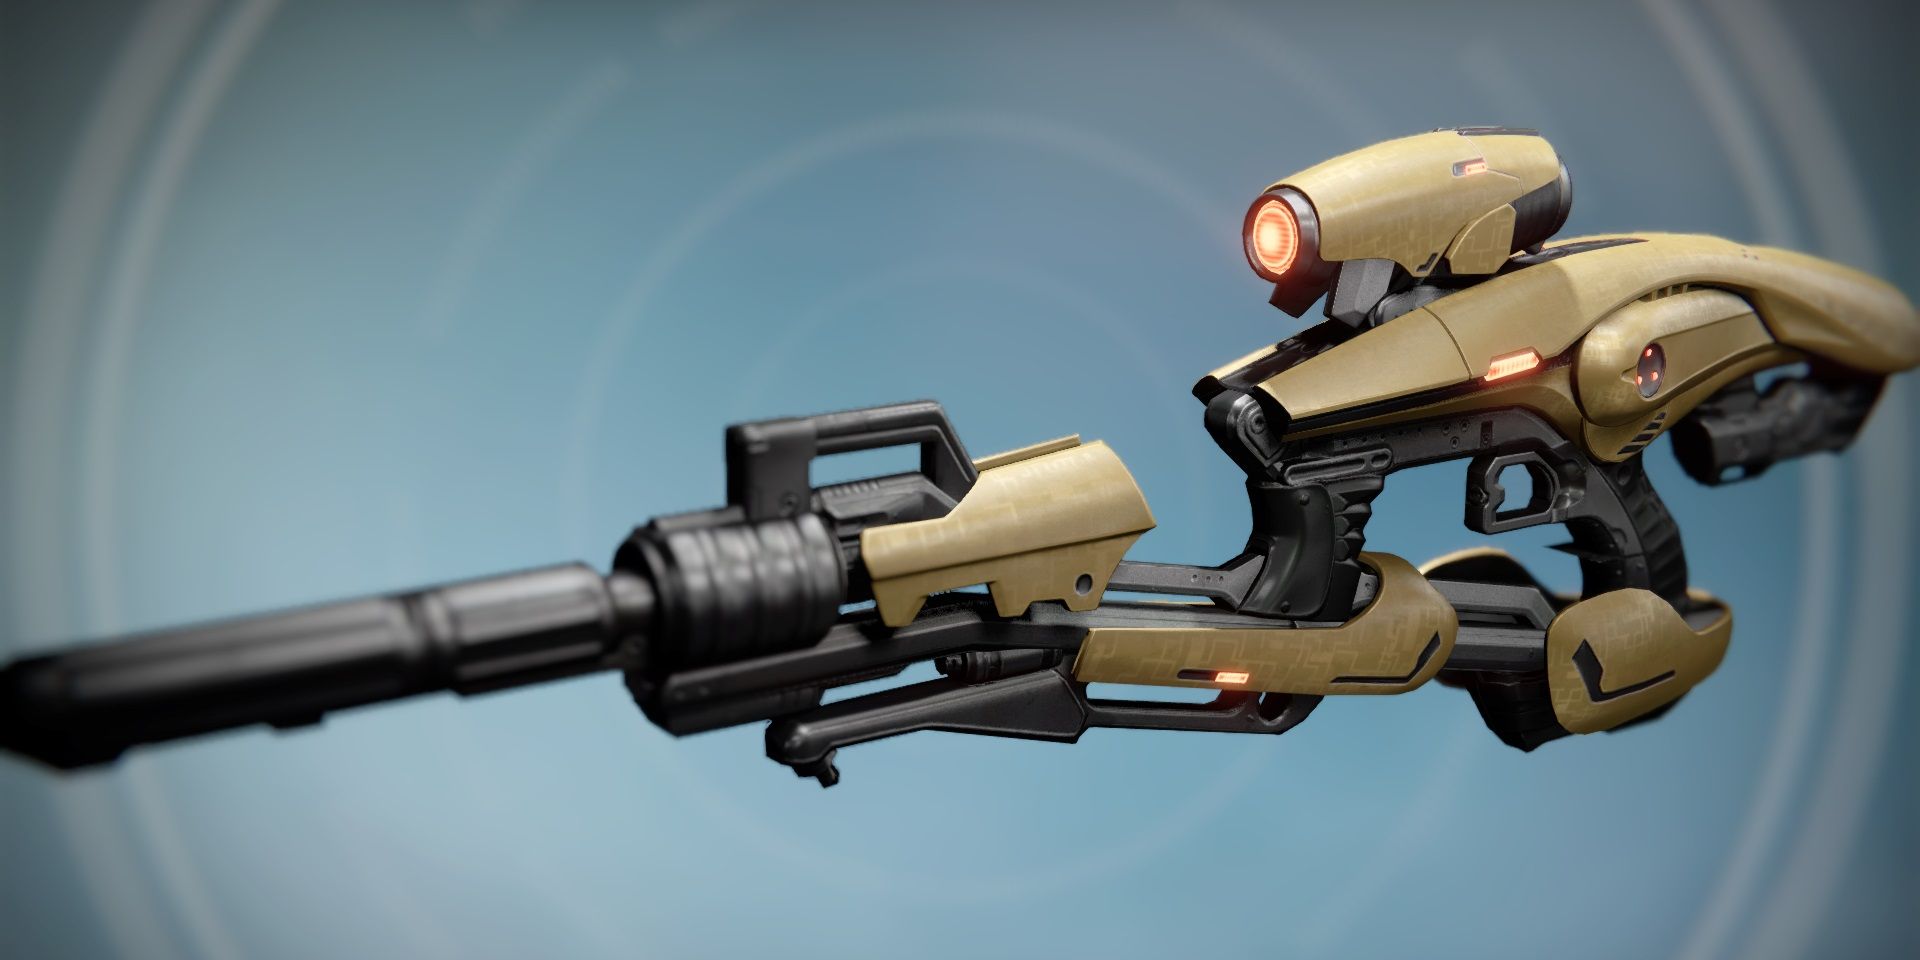 Vex Mythoclast Exotic Fusion Rifle from the Vault of Glass raid in Destiny